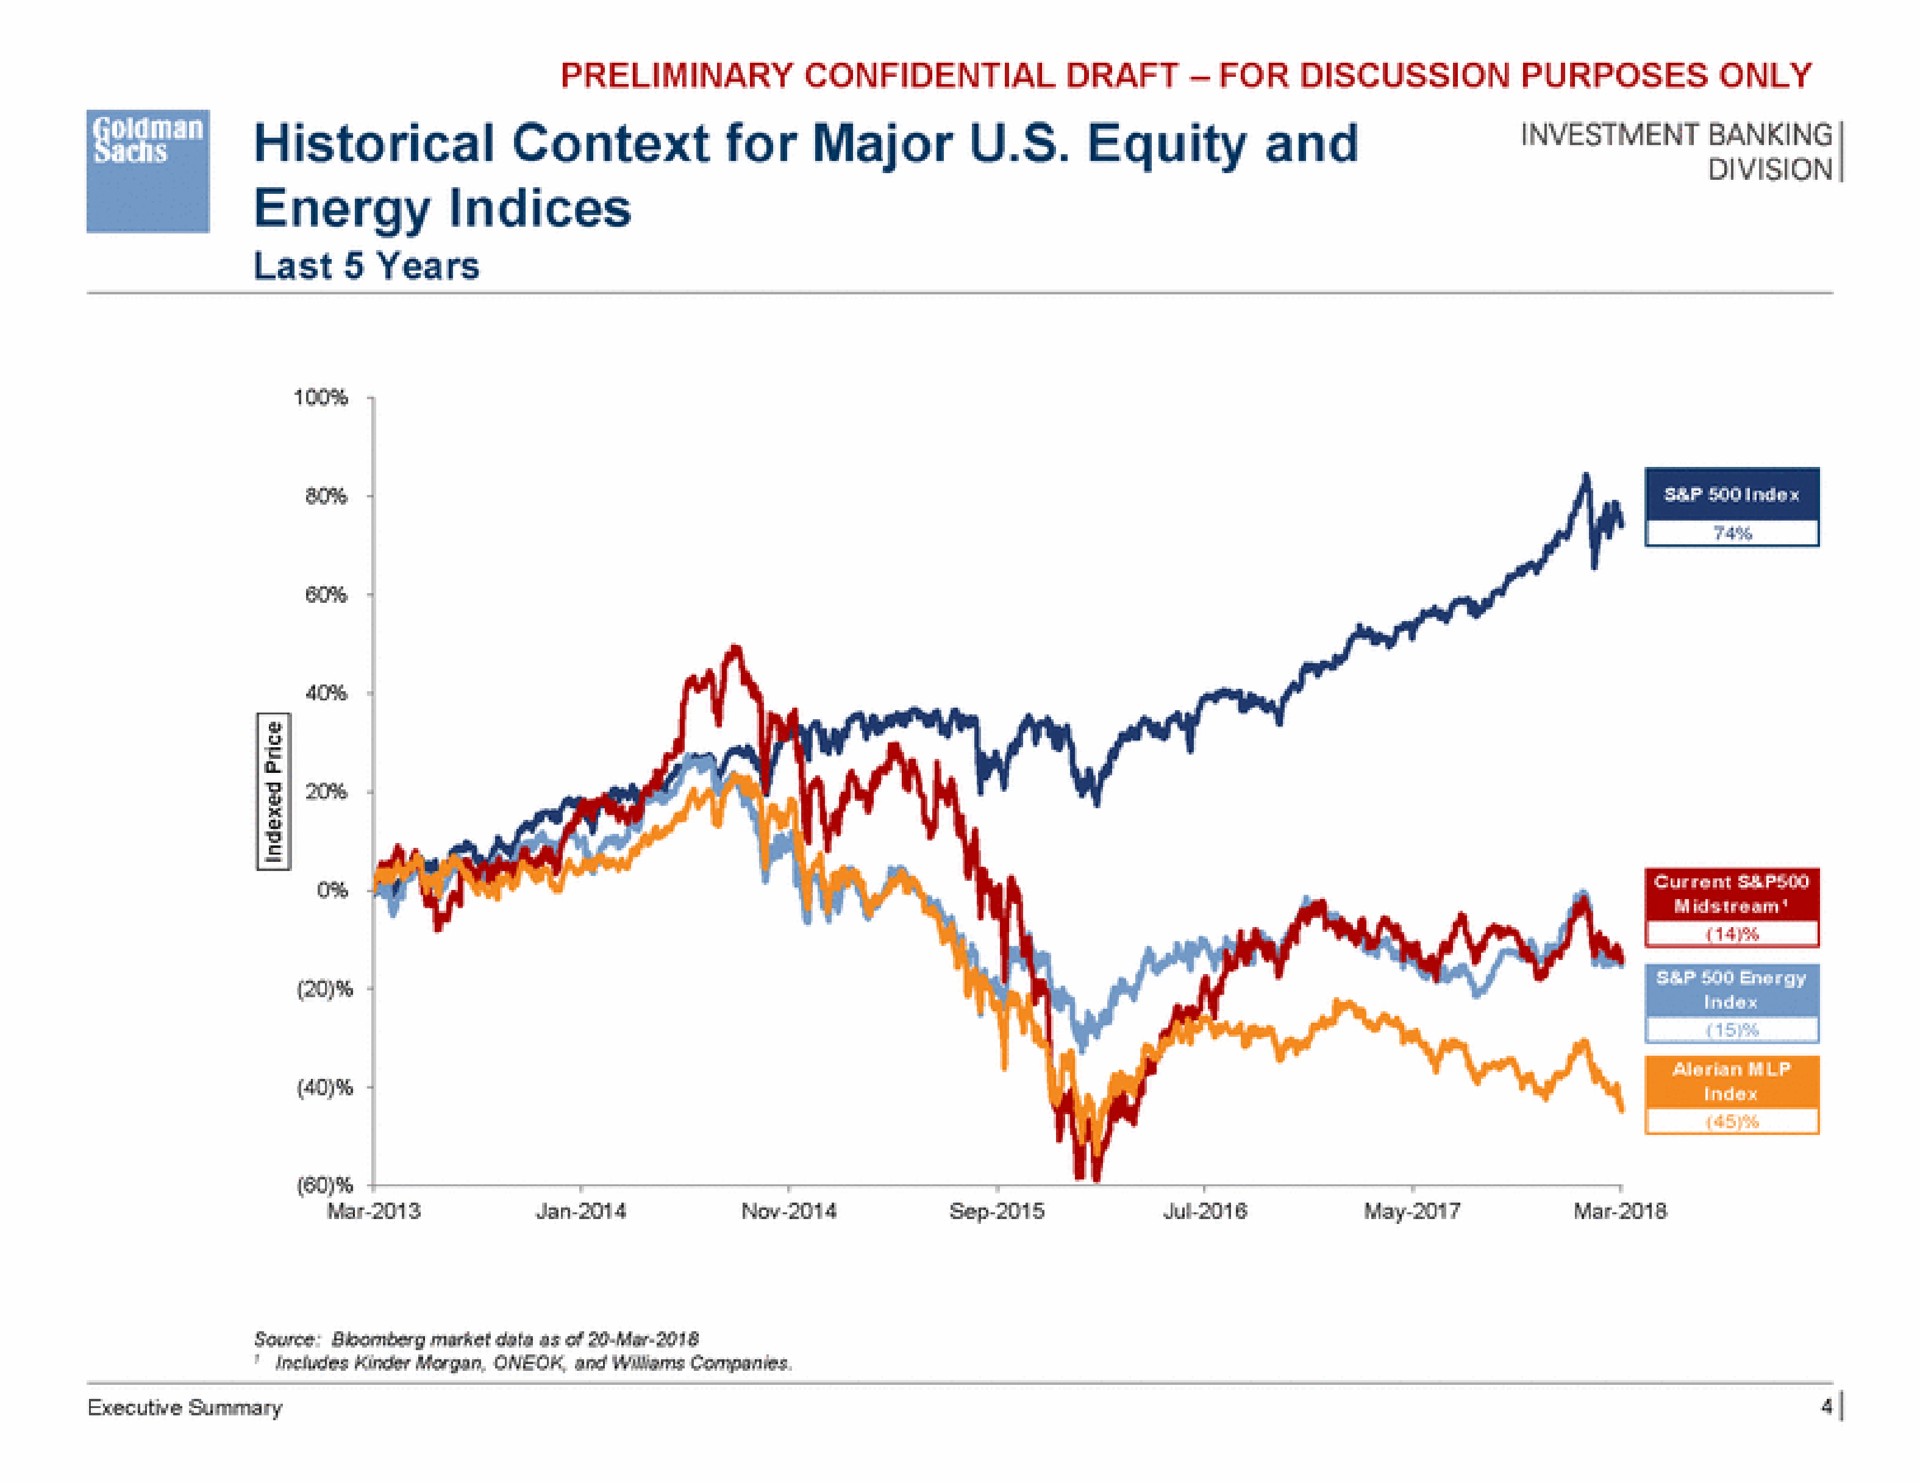 historical context for major equity and energy indices | Goldman Sachs